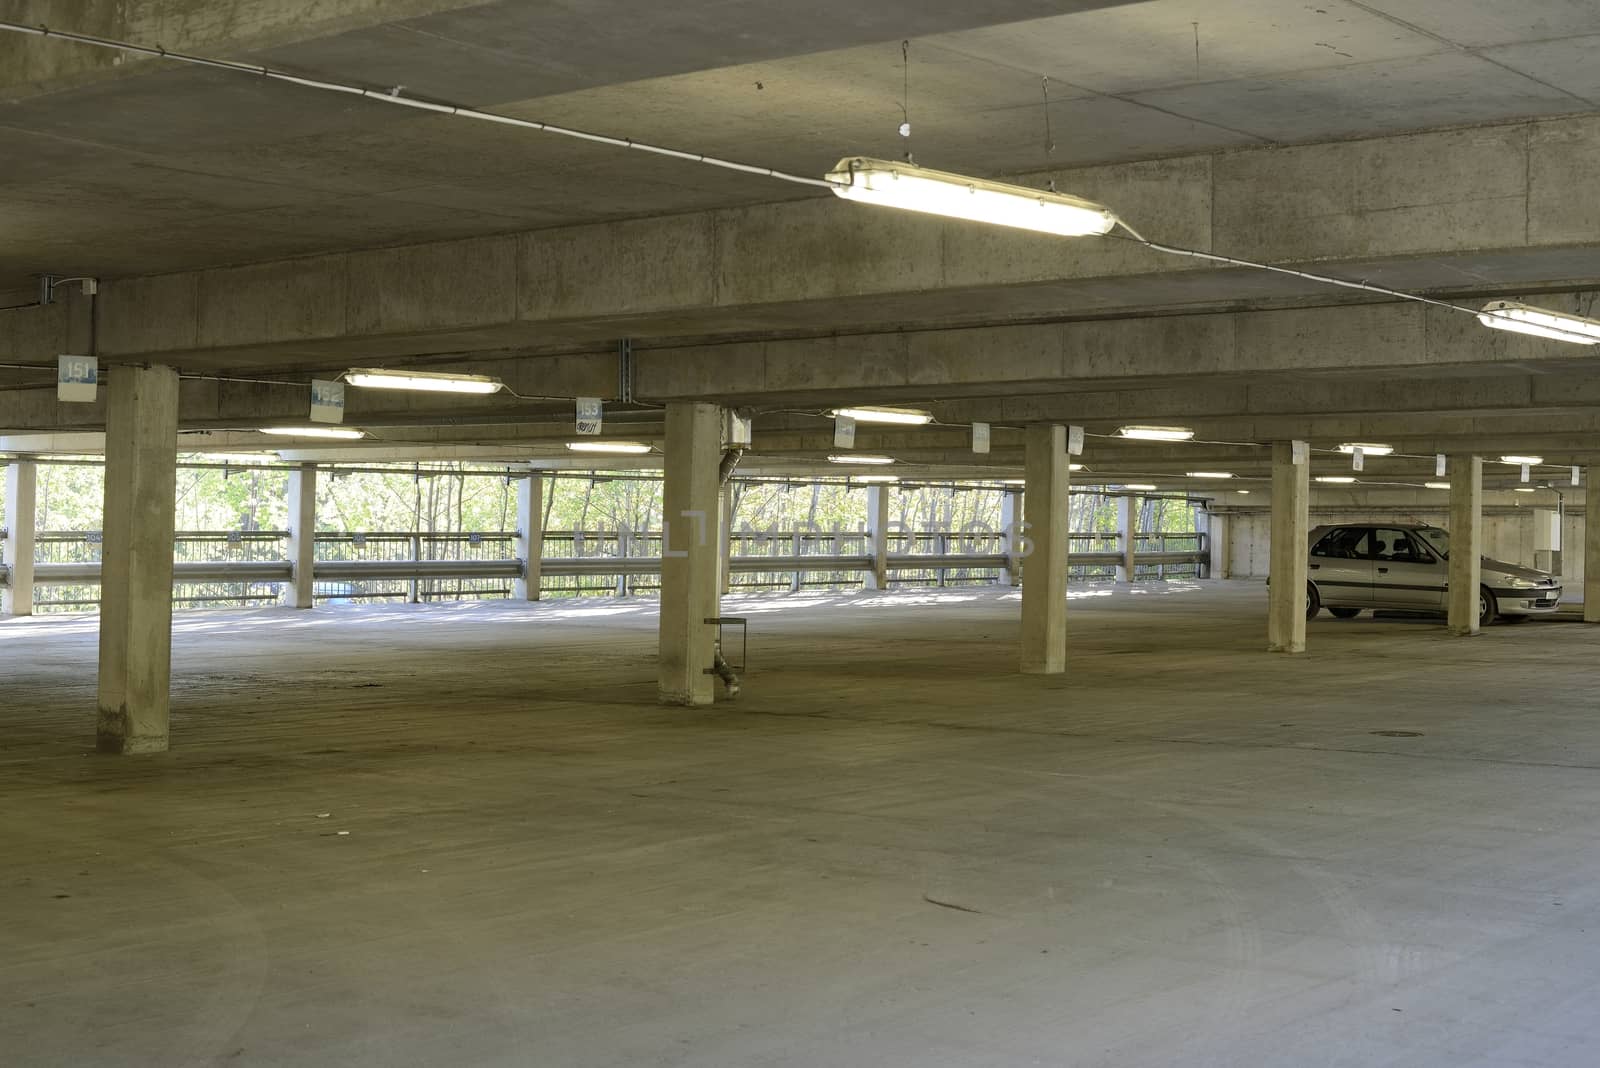 Lit by the sickly glow of cheap fluorescent tubes, an underground parking garage stands almost empty, one car is left.